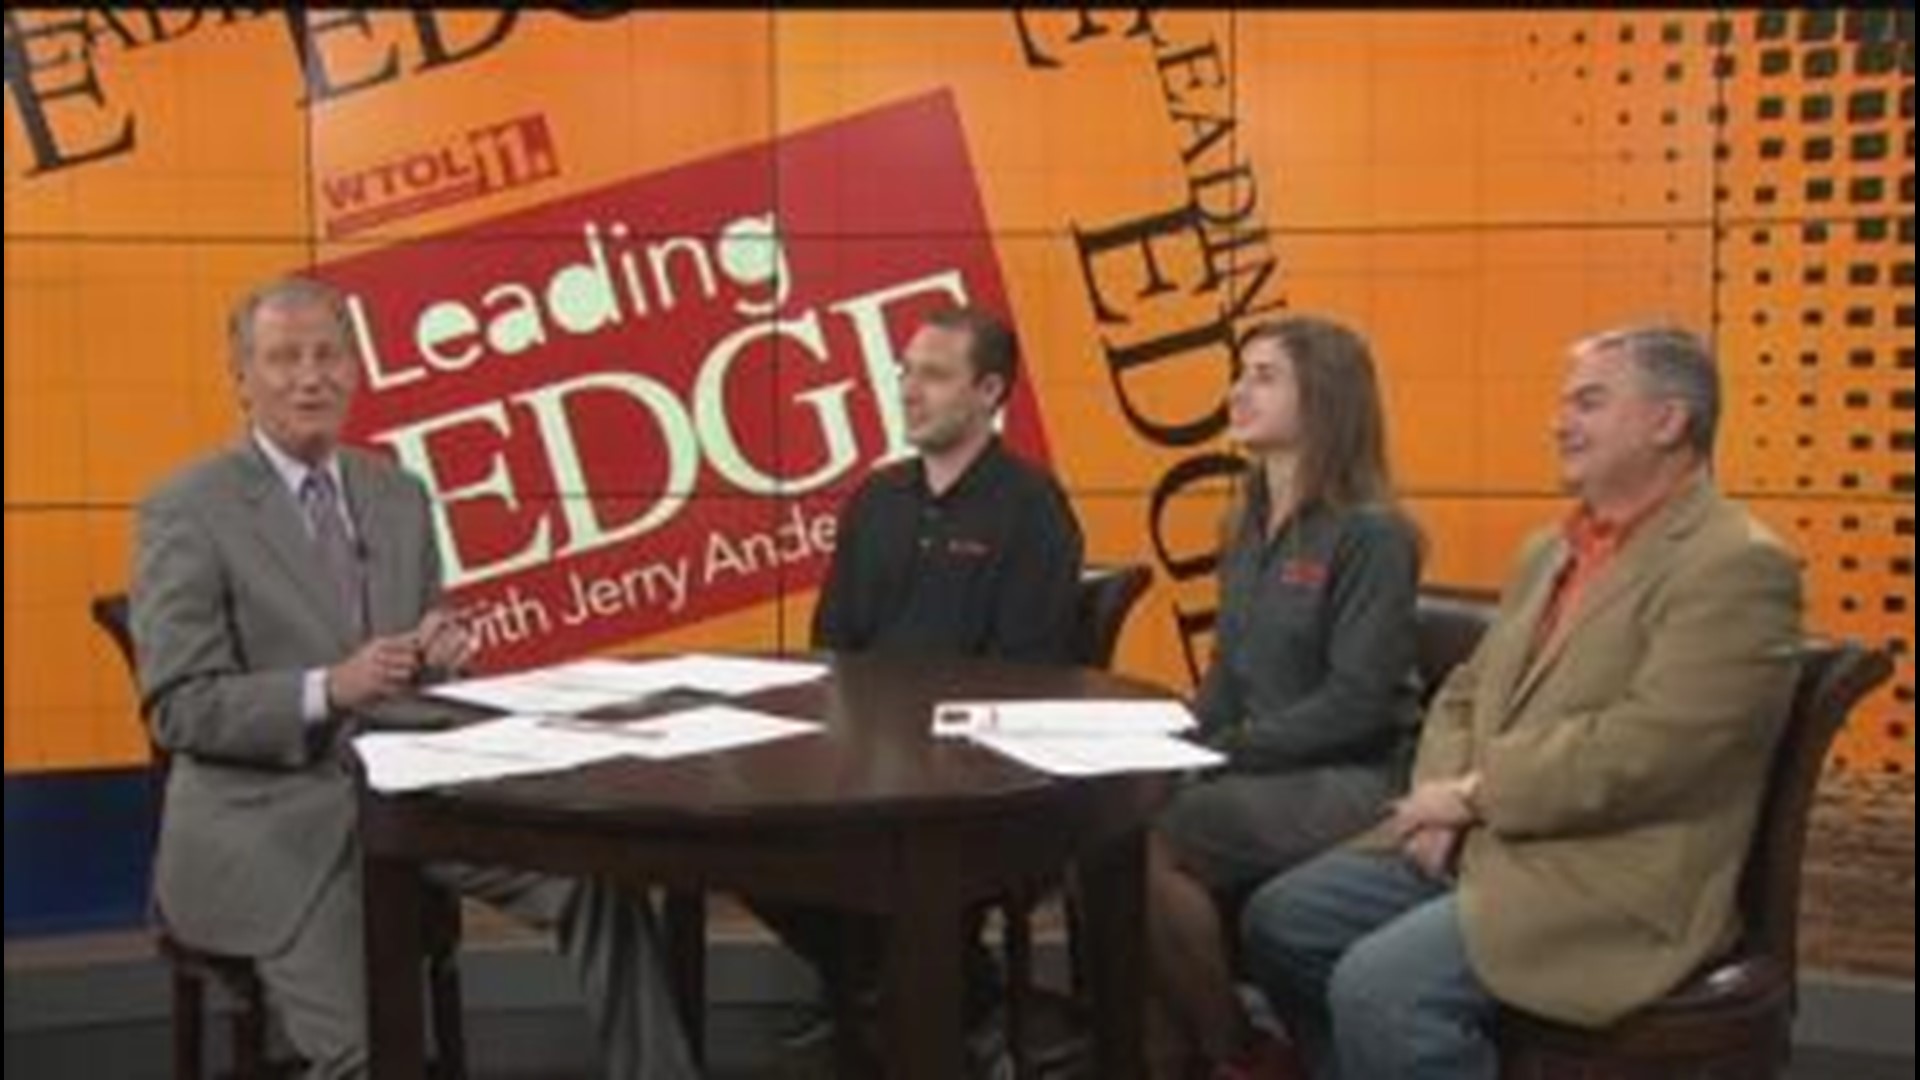 April 2: Leading Edge with Jerry Anderson - Segment 3